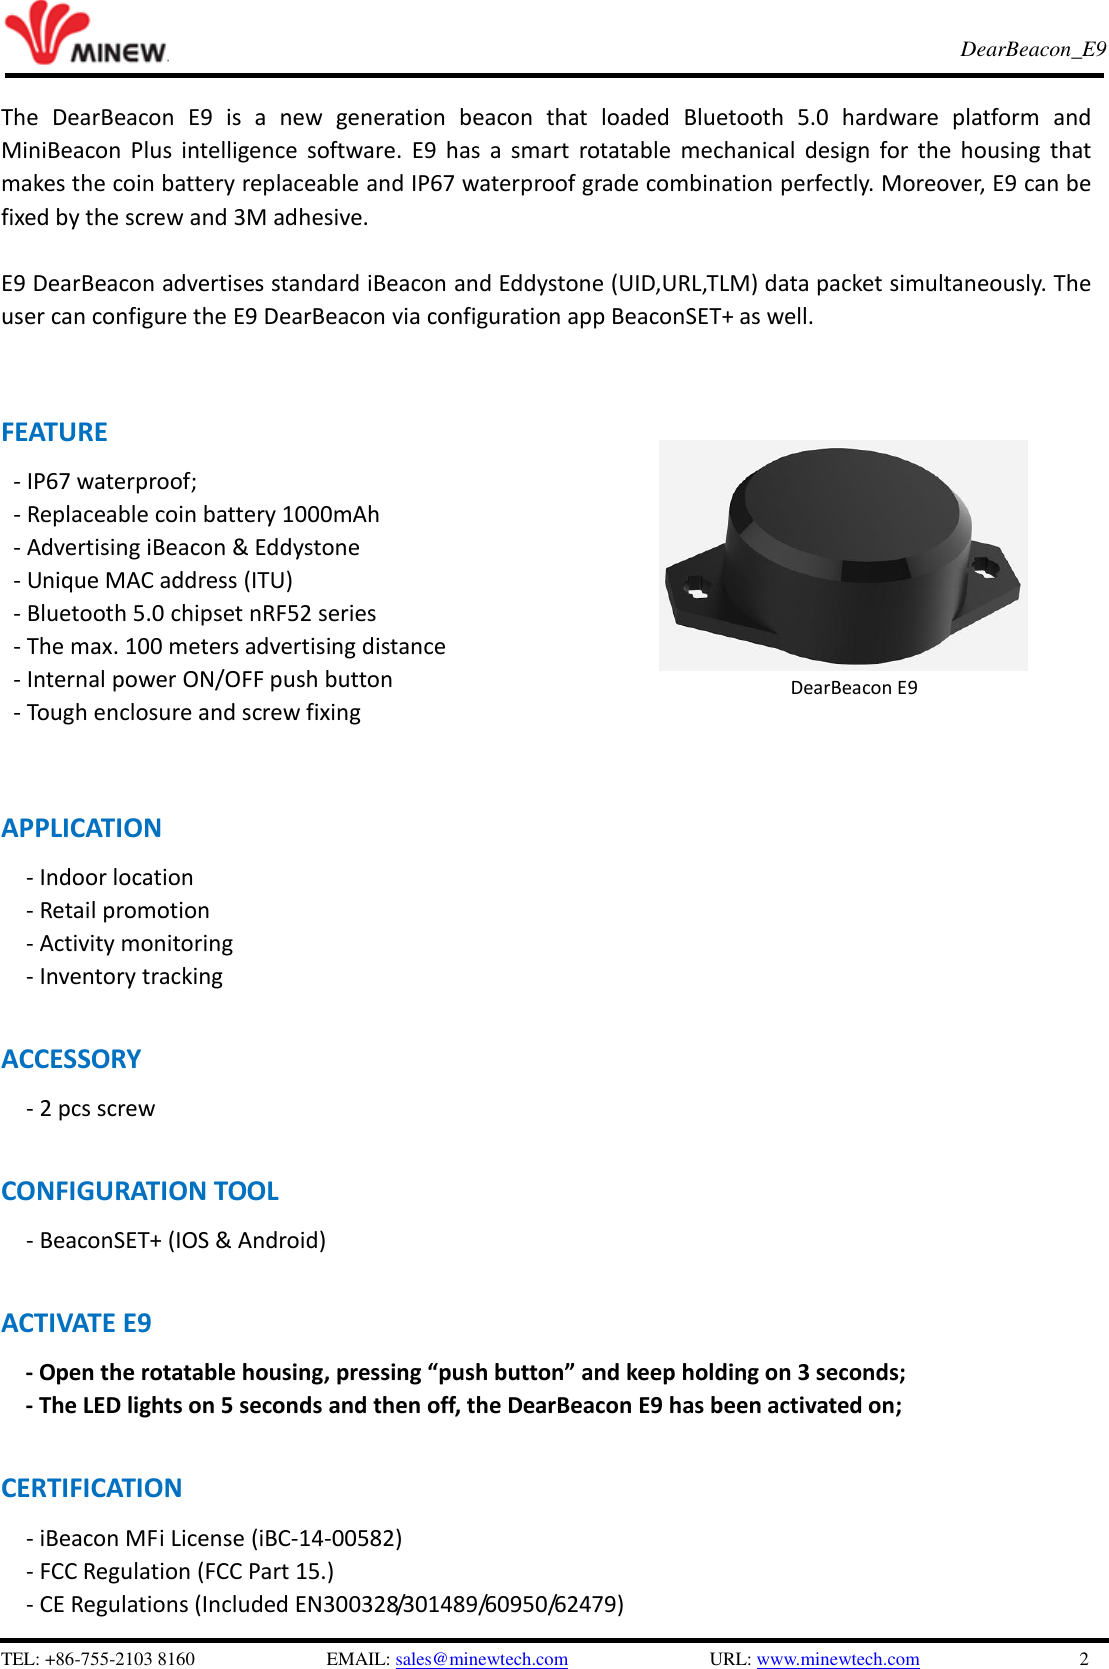   TEL: +86-755-2103 8160                          EMAIL: sales@minewtech.com               URL: www.minewtech.com                 2 E8 TagBeacon   DearBeacon_E9    The  DearBeacon  E9  is  a  new  generation  beacon  that  loaded  Bluetooth  5.0  hardware  platform  and MiniBeacon Plus intelligence  software.  E9  has a  smart  rotatable mechanical design for the  housing  that makes the coin battery replaceable and IP67 waterproof grade combination perfectly. Moreover, E9 can be fixed by the screw and 3M adhesive.    E9 DearBeacon advertises standard iBeacon and Eddystone (UID,URL,TLM) data packet simultaneously. The user can configure the E9 DearBeacon via configuration app BeaconSET+ as well.   FEATURE - IP67 waterproof; - Replaceable coin battery 1000mAh - Advertising iBeacon &amp; Eddystone - Unique MAC address (ITU) - Bluetooth 5.0 chipset nRF52 series - The max. 100 meters advertising distance - Internal power ON/OFF push button - Tough enclosure and screw fixing   APPLICATION       - Indoor location   - Retail promotion   - Activity monitoring   - Inventory tracking    ACCESSORY           - 2 pcs screw  CONFIGURATION TOOL      - BeaconSET+ (IOS &amp; Android)  ACTIVATE E9         - Open the rotatable housing, pressing “push button” and keep holding on 3 seconds; - The LED lights on 5 seconds and then off, the DearBeacon E9 has been activated on;    CERTIFICATION - iBeacon MFi License (iBC-14-00582)   - FCC Regulation (FCC Part 15.) - CE Regulations (Included EN300328/301489/60950/62479)              DearBeacon E9 